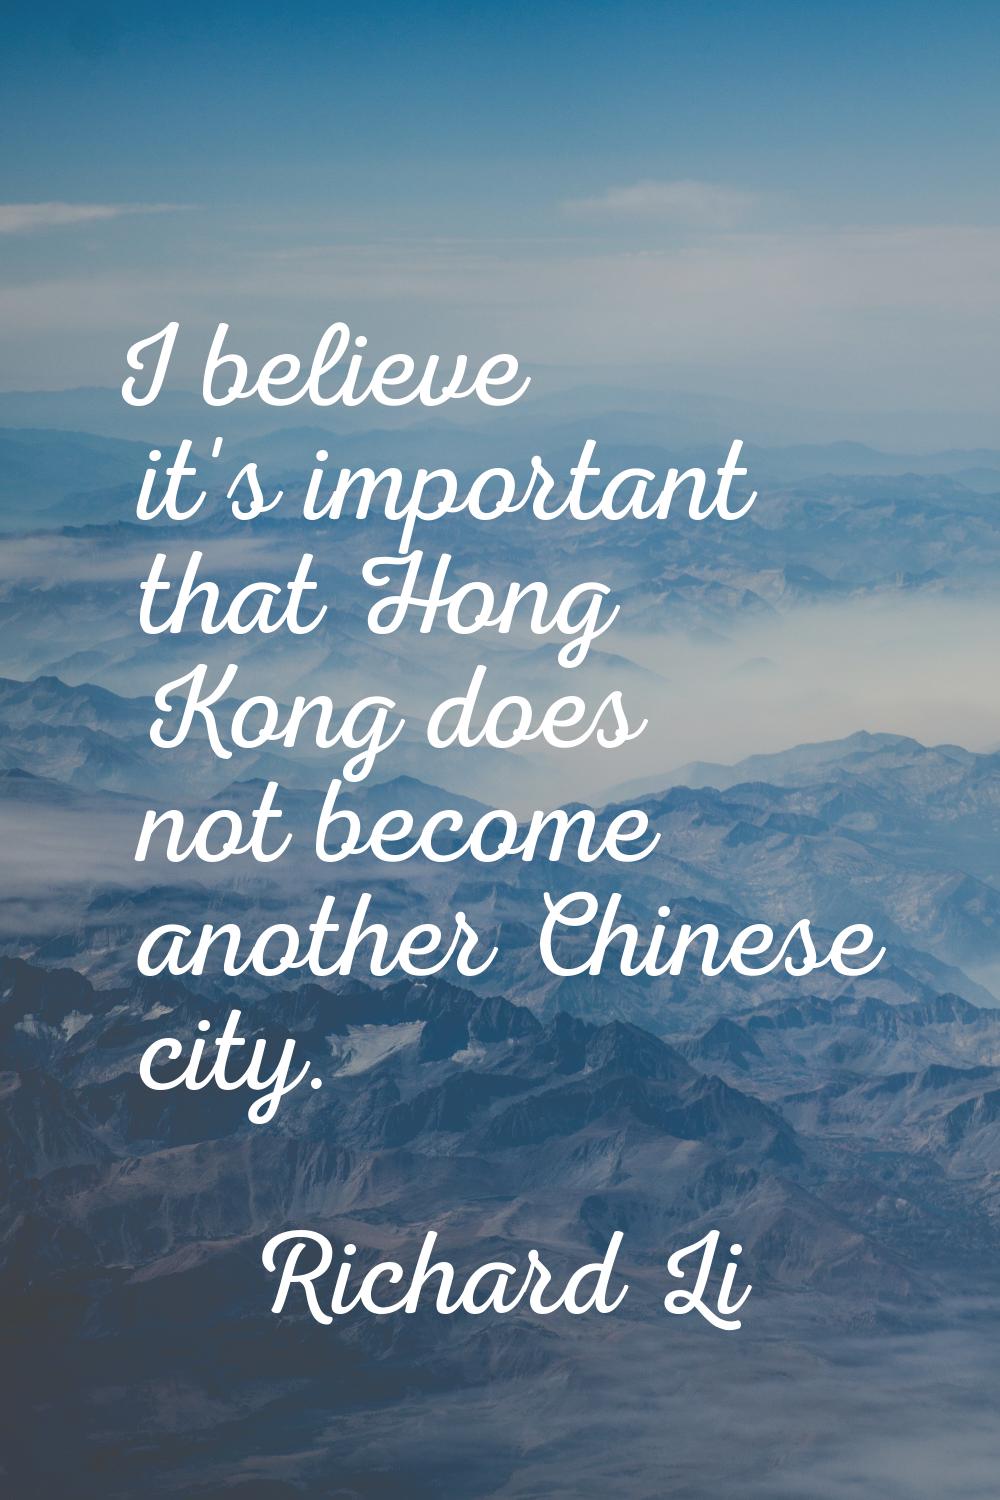 I believe it's important that Hong Kong does not become another Chinese city.